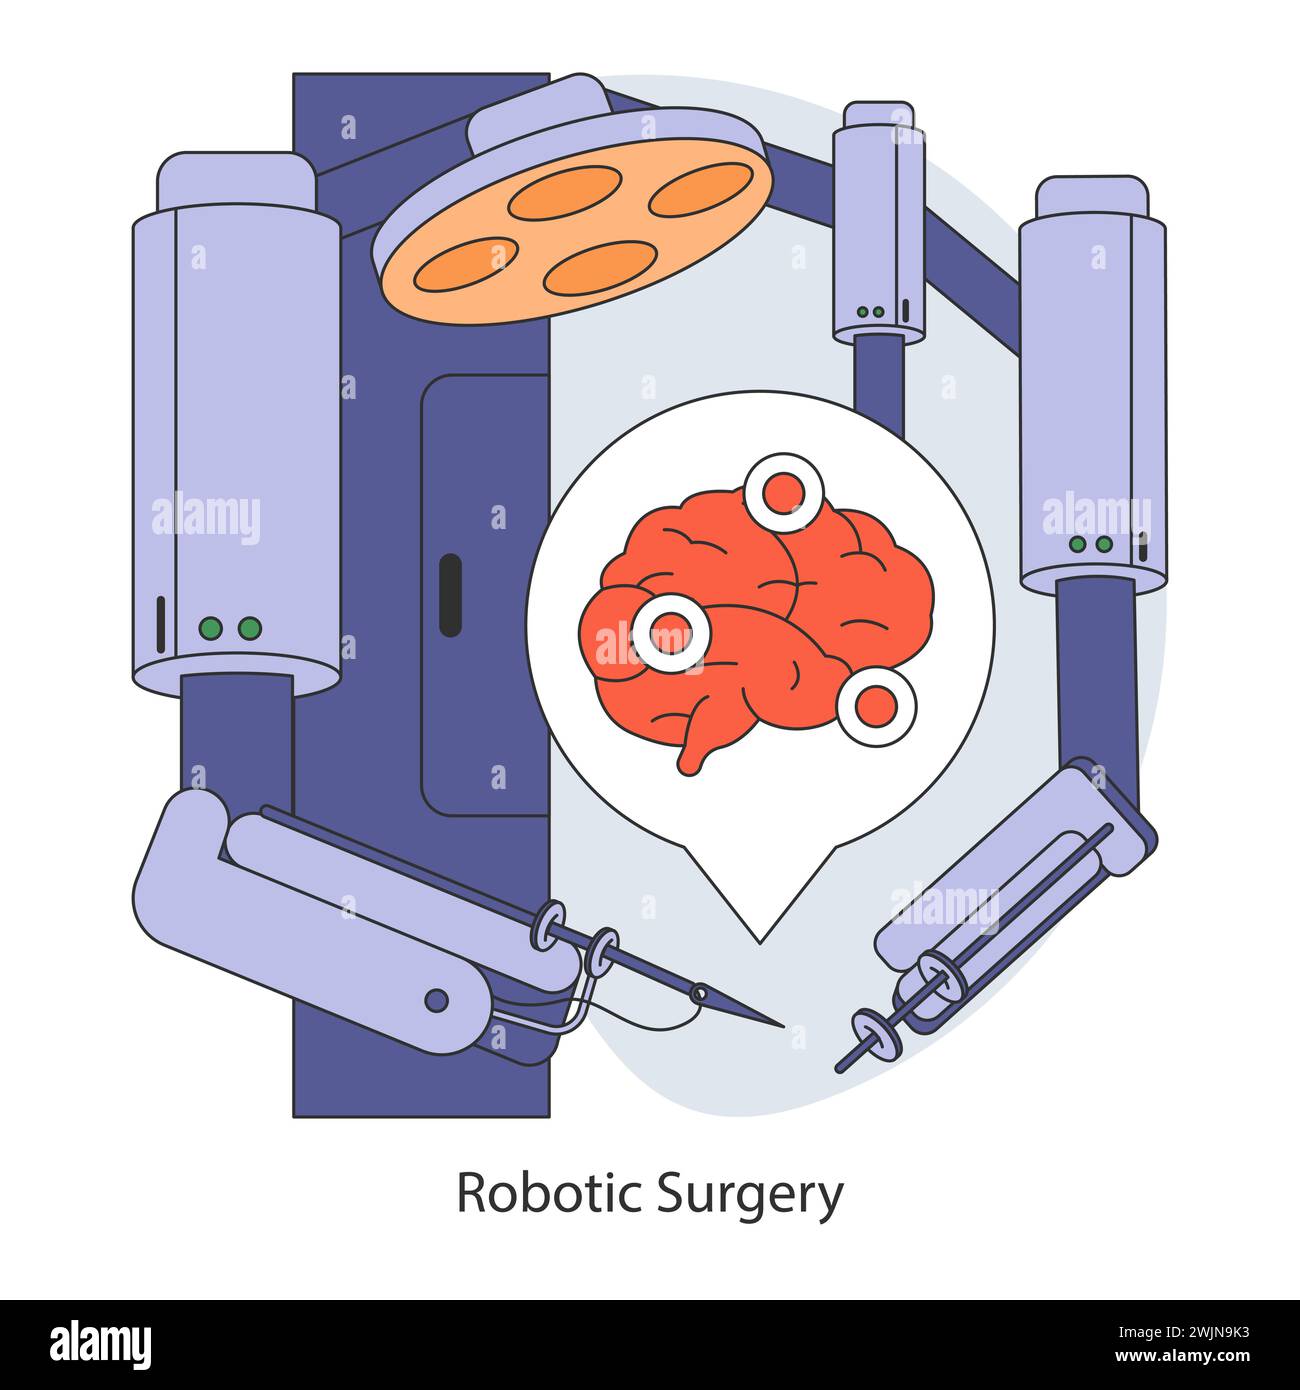 Surgical Precision concept. Robotic surgery with enhanced accuracy and control for complex procedures. Technological leap in operative care. Flat vector illustration. Stock Vector